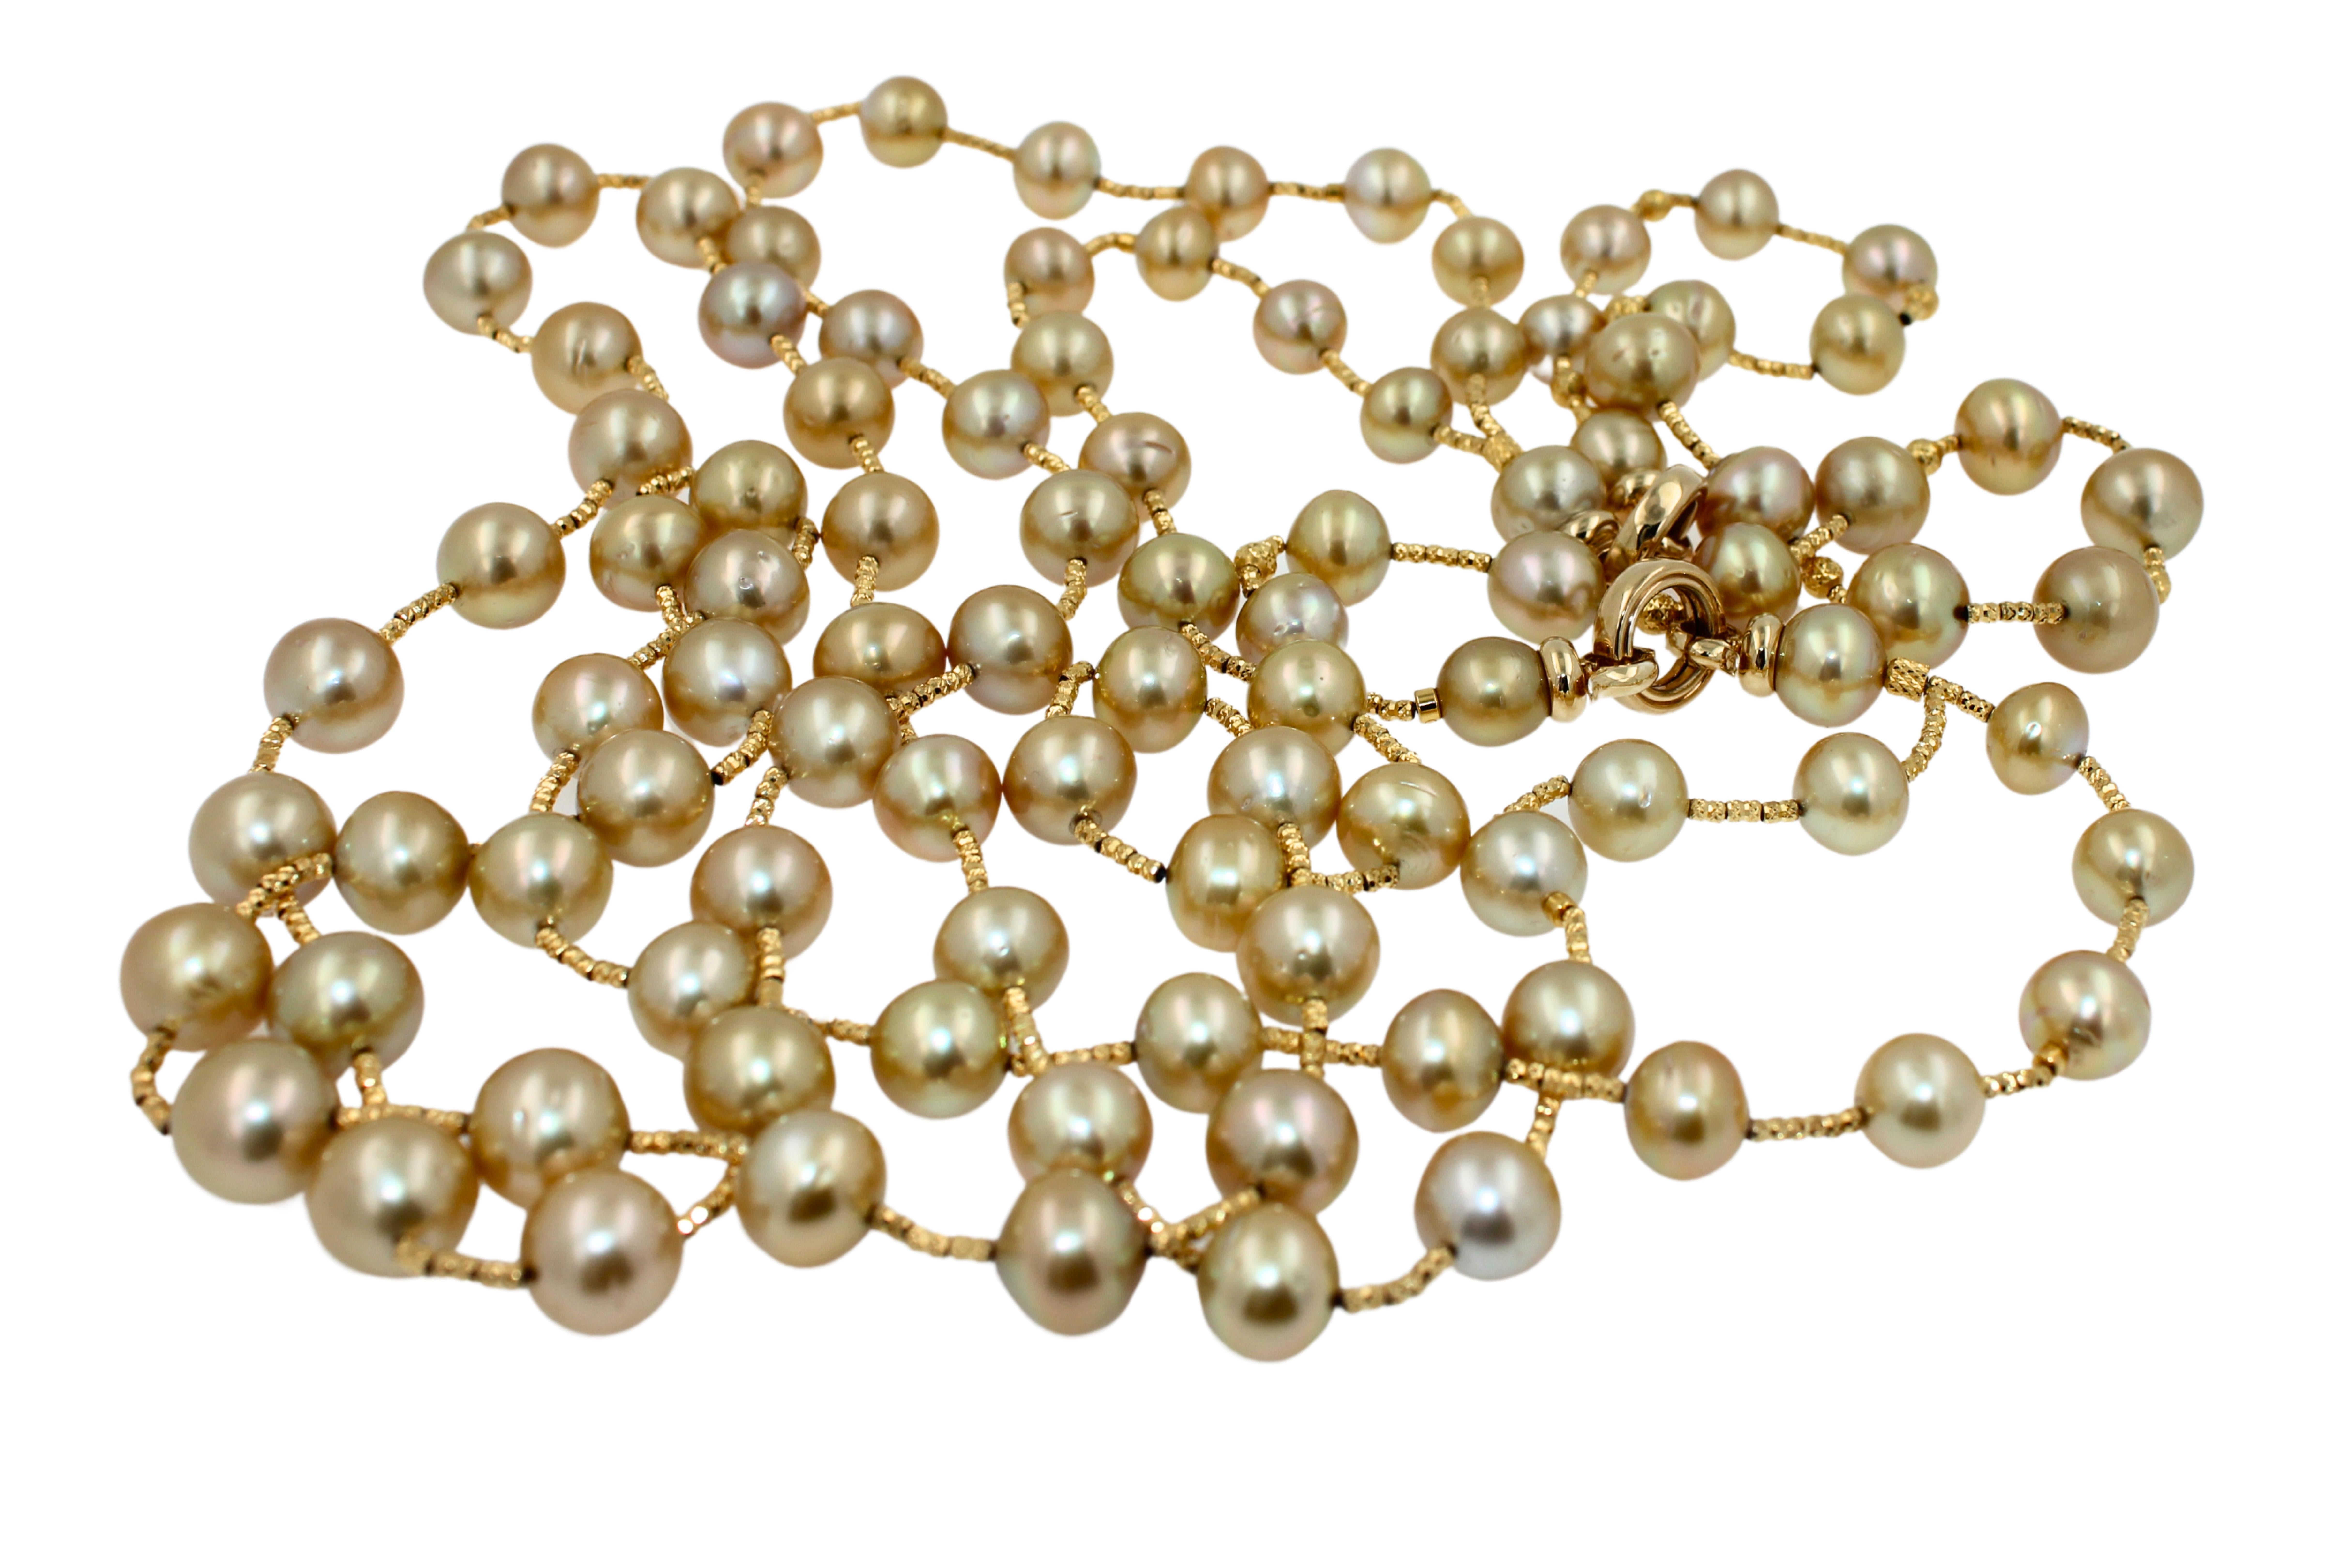 Very Beautiful Golden Yellow AAA Quality South Sea Pearls
18K Yellow Gold Clasps, Details, Strands
6-10MM Pearl Sizes